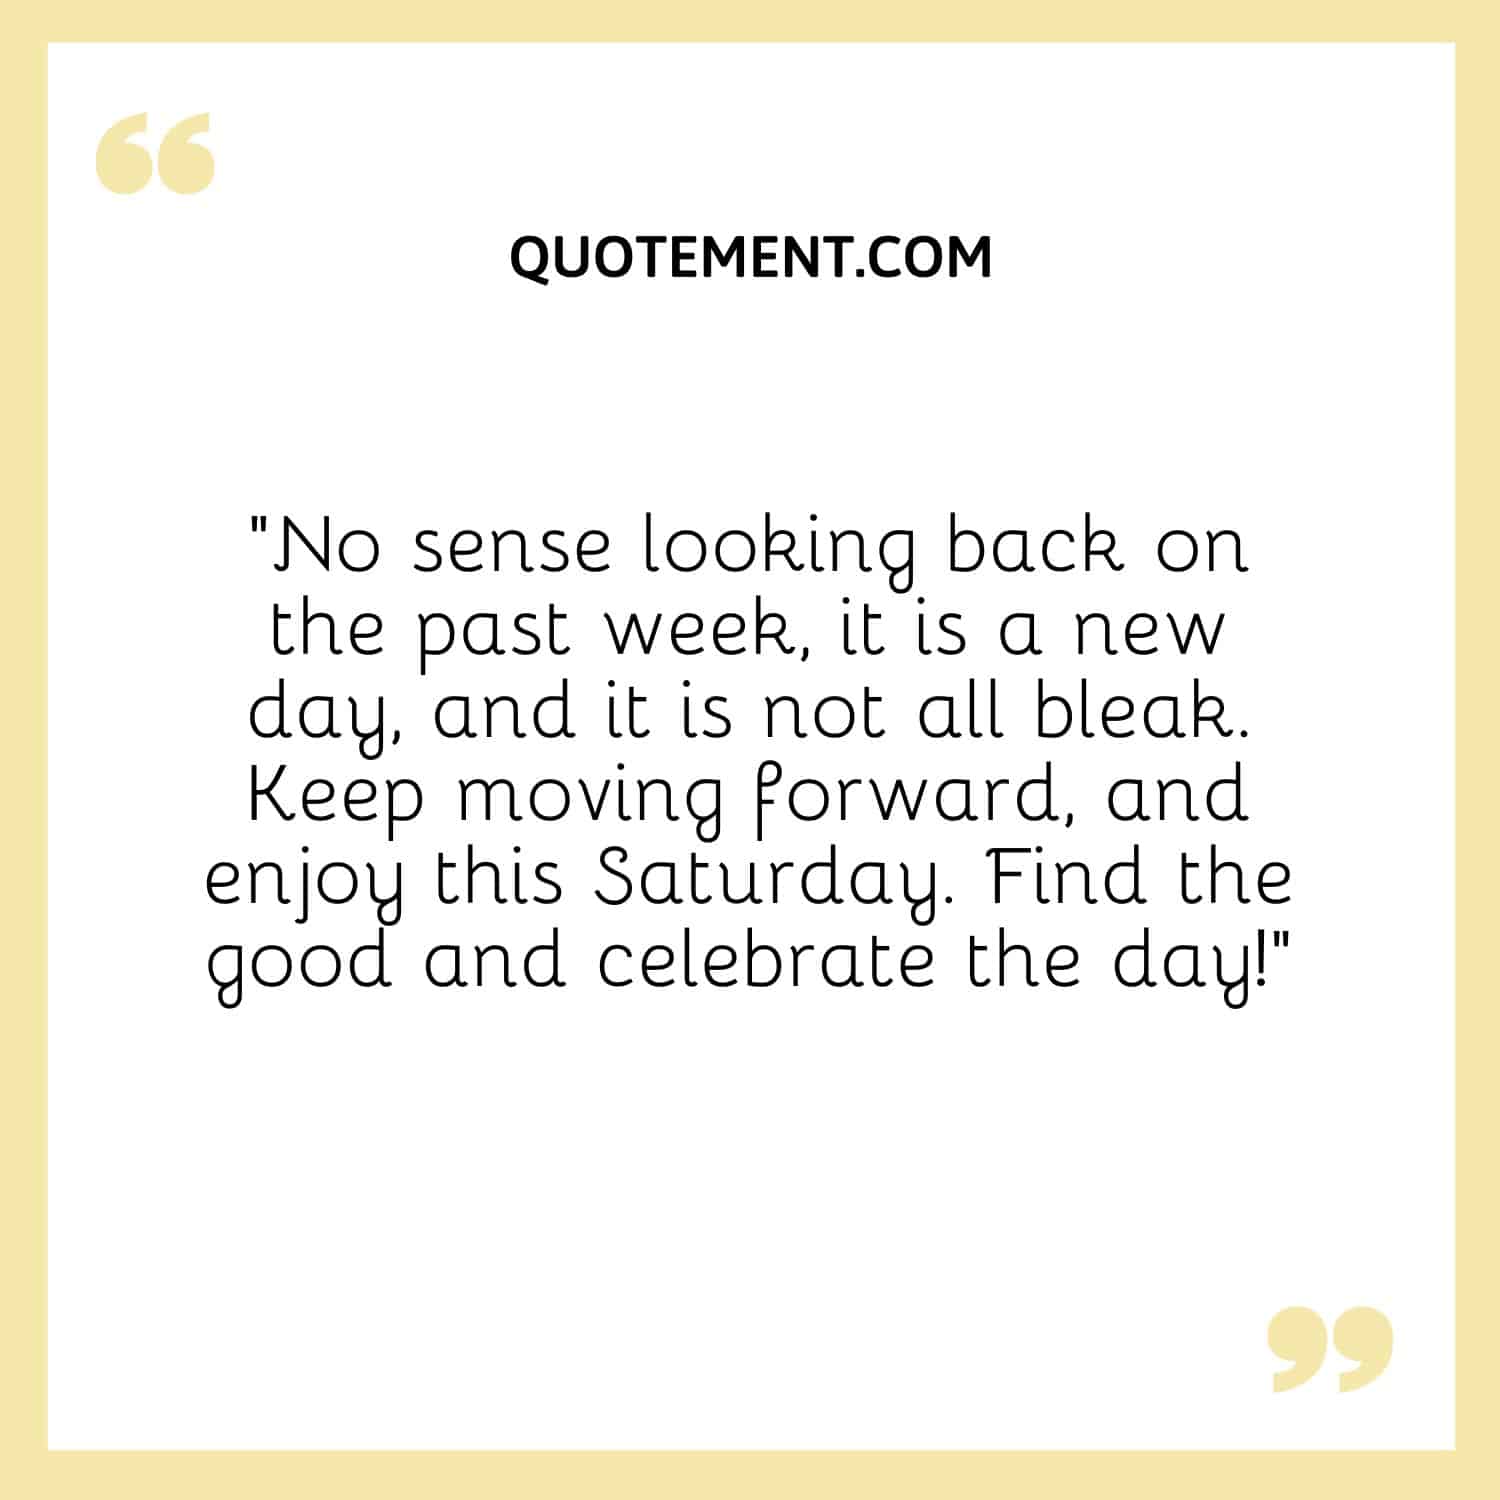 “No sense looking back on the past week, it is a new day, and it is not all bleak. Keep moving forward, and enjoy this Saturday. Find the good and celebrate the day!”